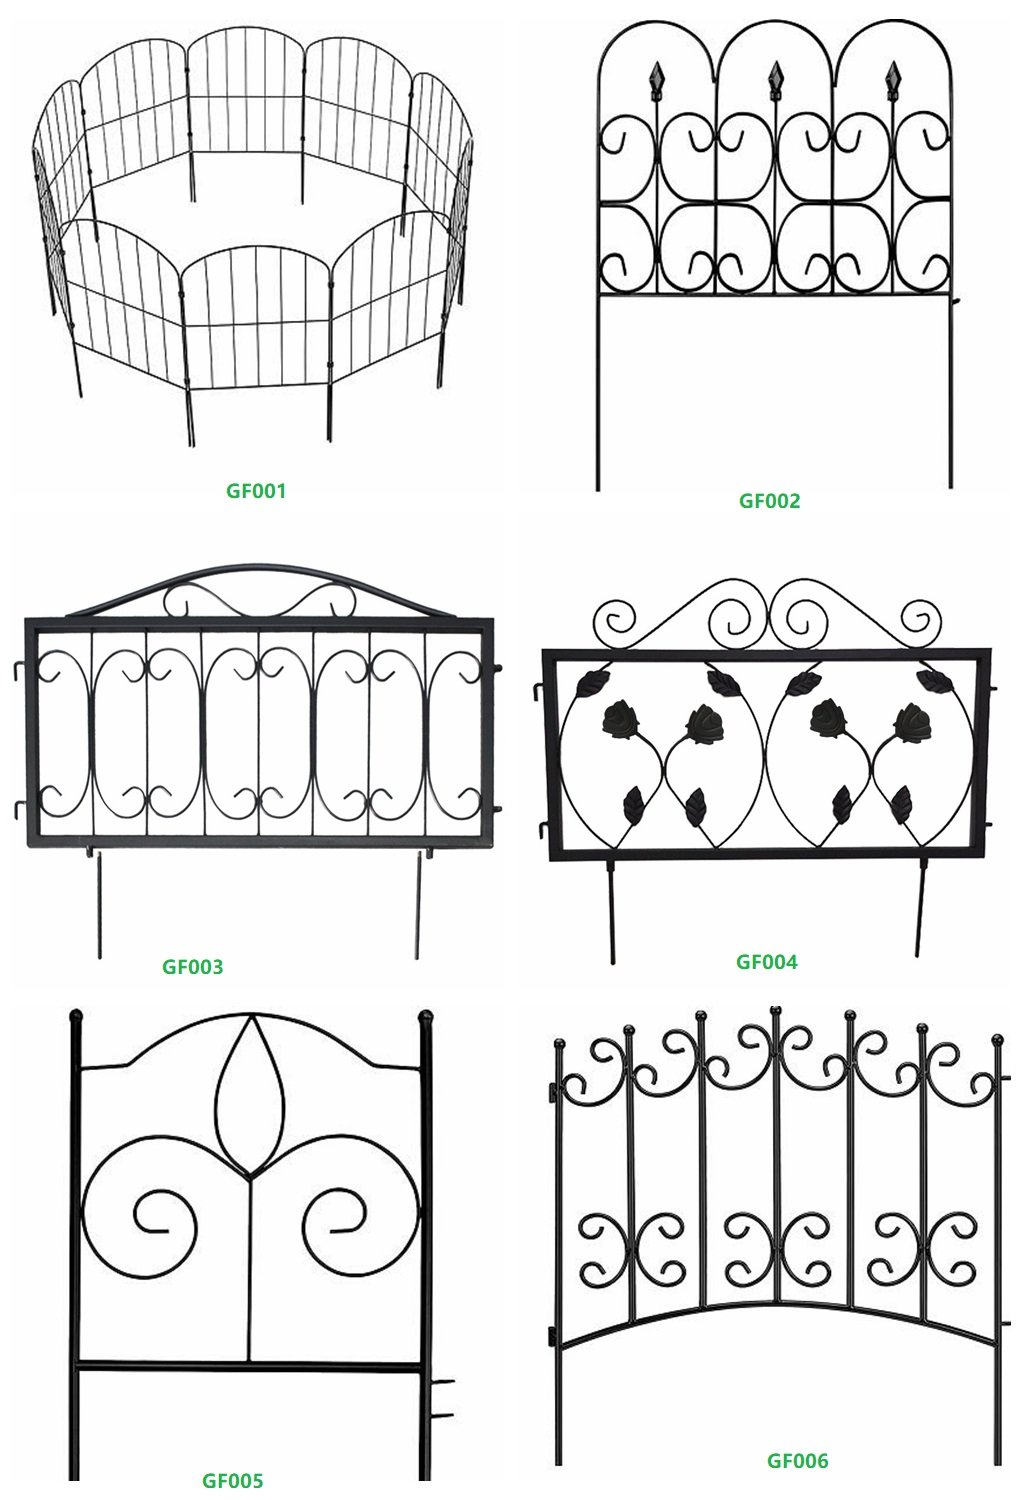 6 types of garden fence showing